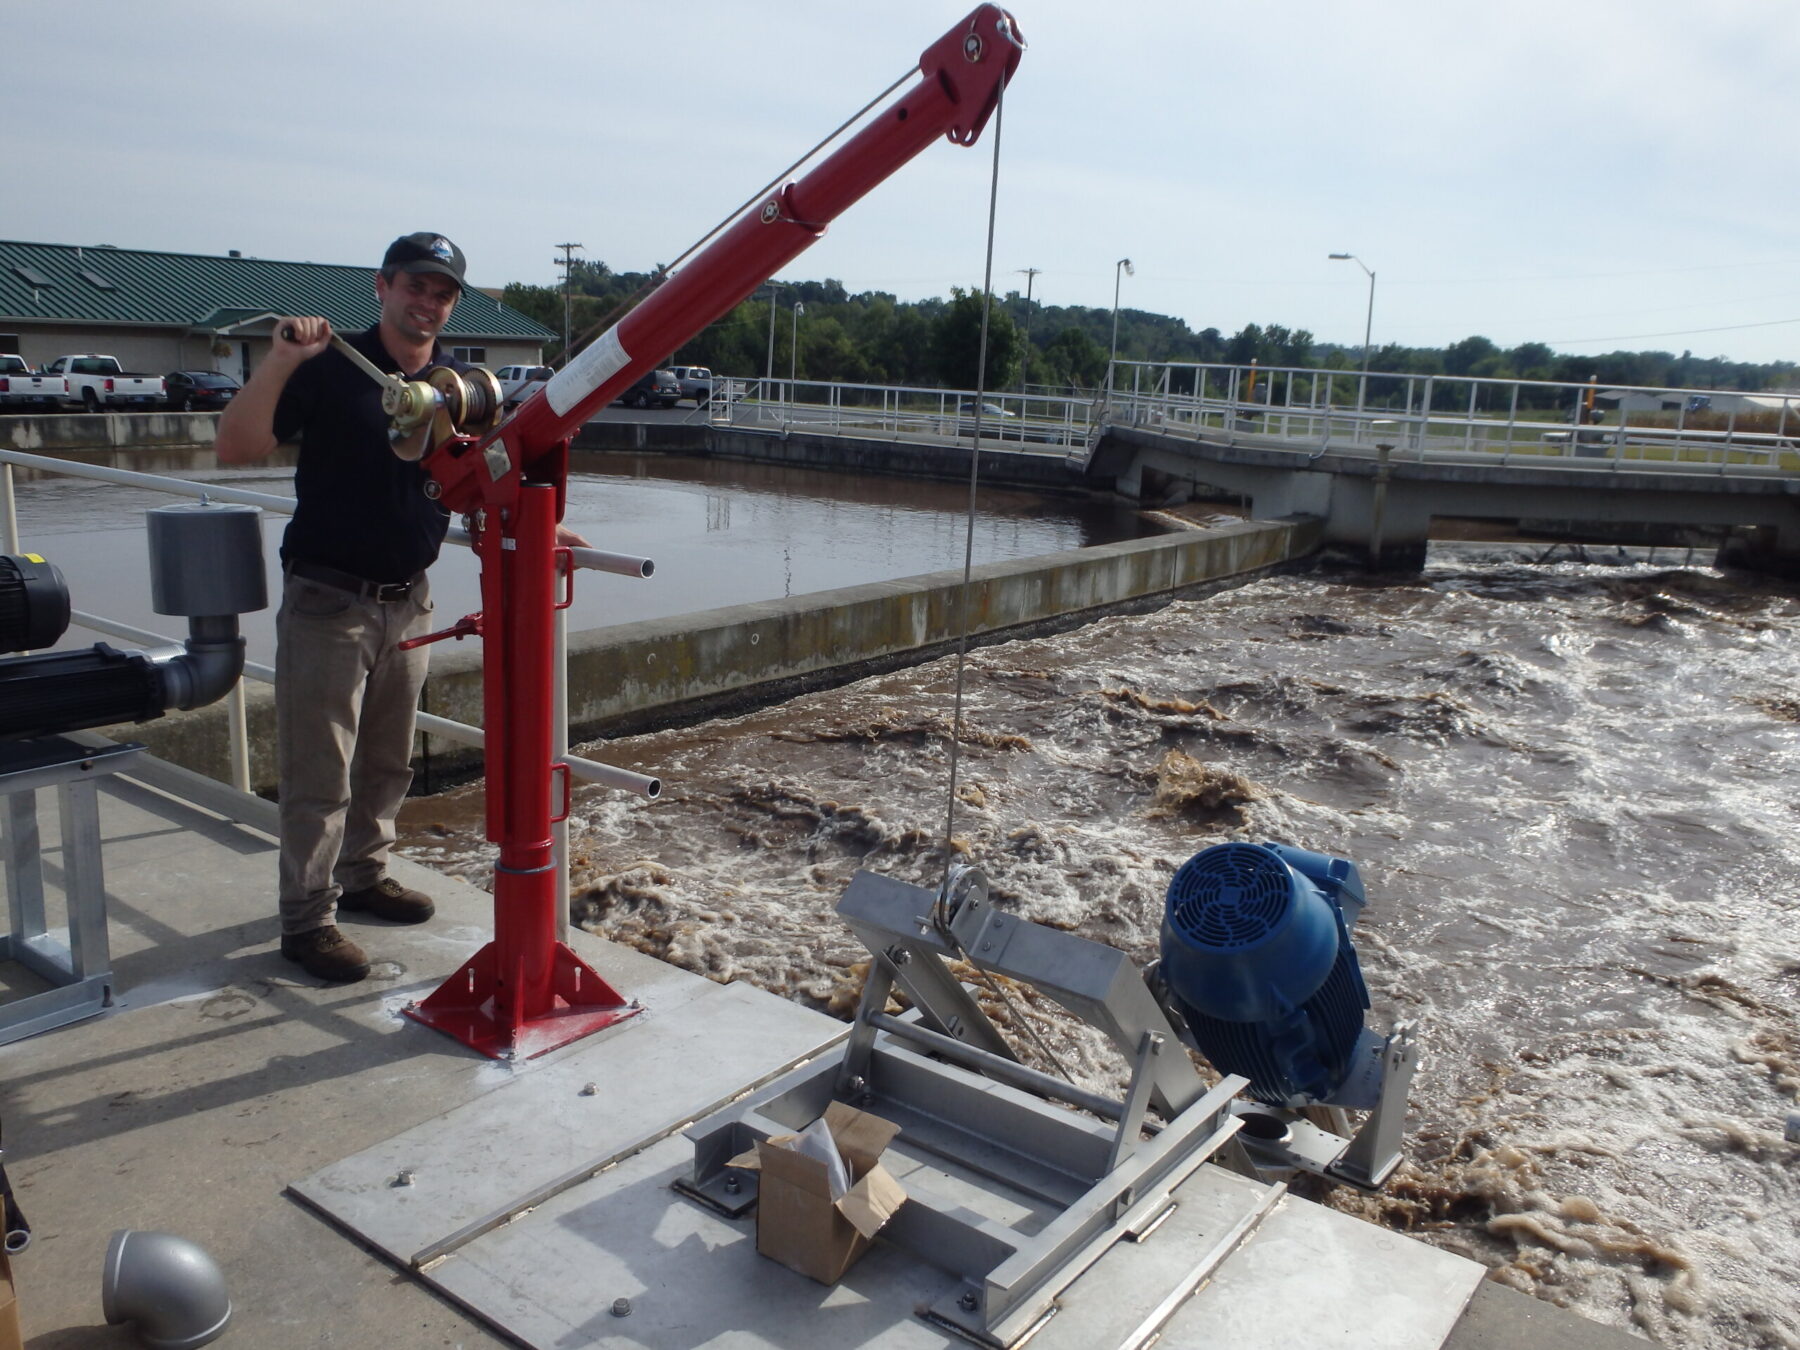 A waste water engineer operates a pulley to change the position of an aerator treating water